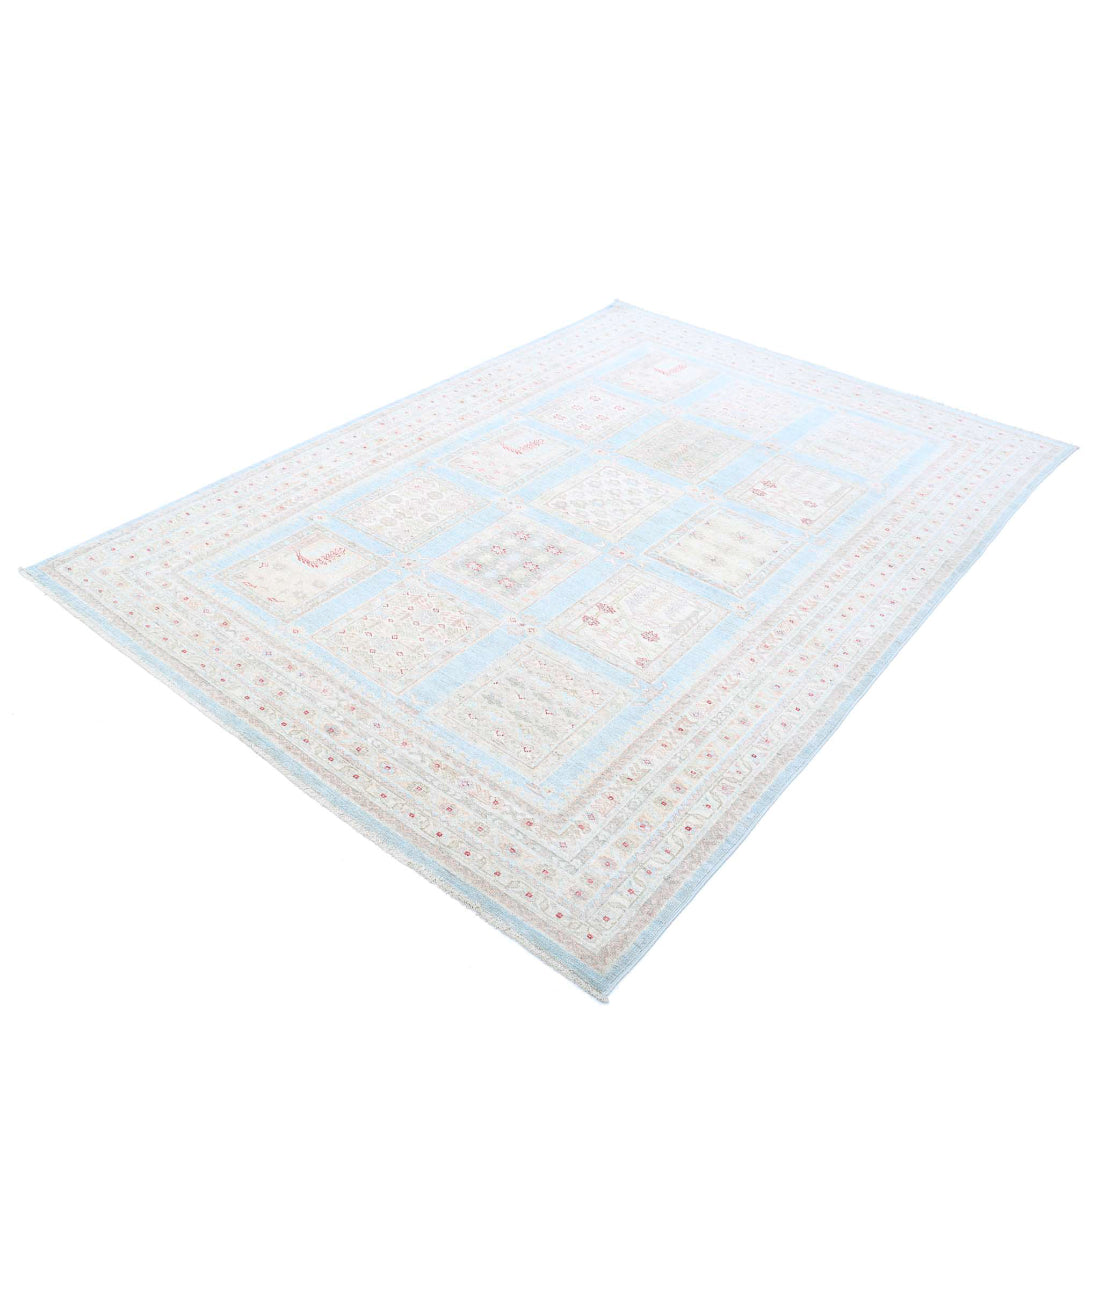 Serenity 5'7'' X 7'11'' Hand-Knotted Wool Rug 5'7'' x 7'11'' (168 X 238) / Blue / Ivory